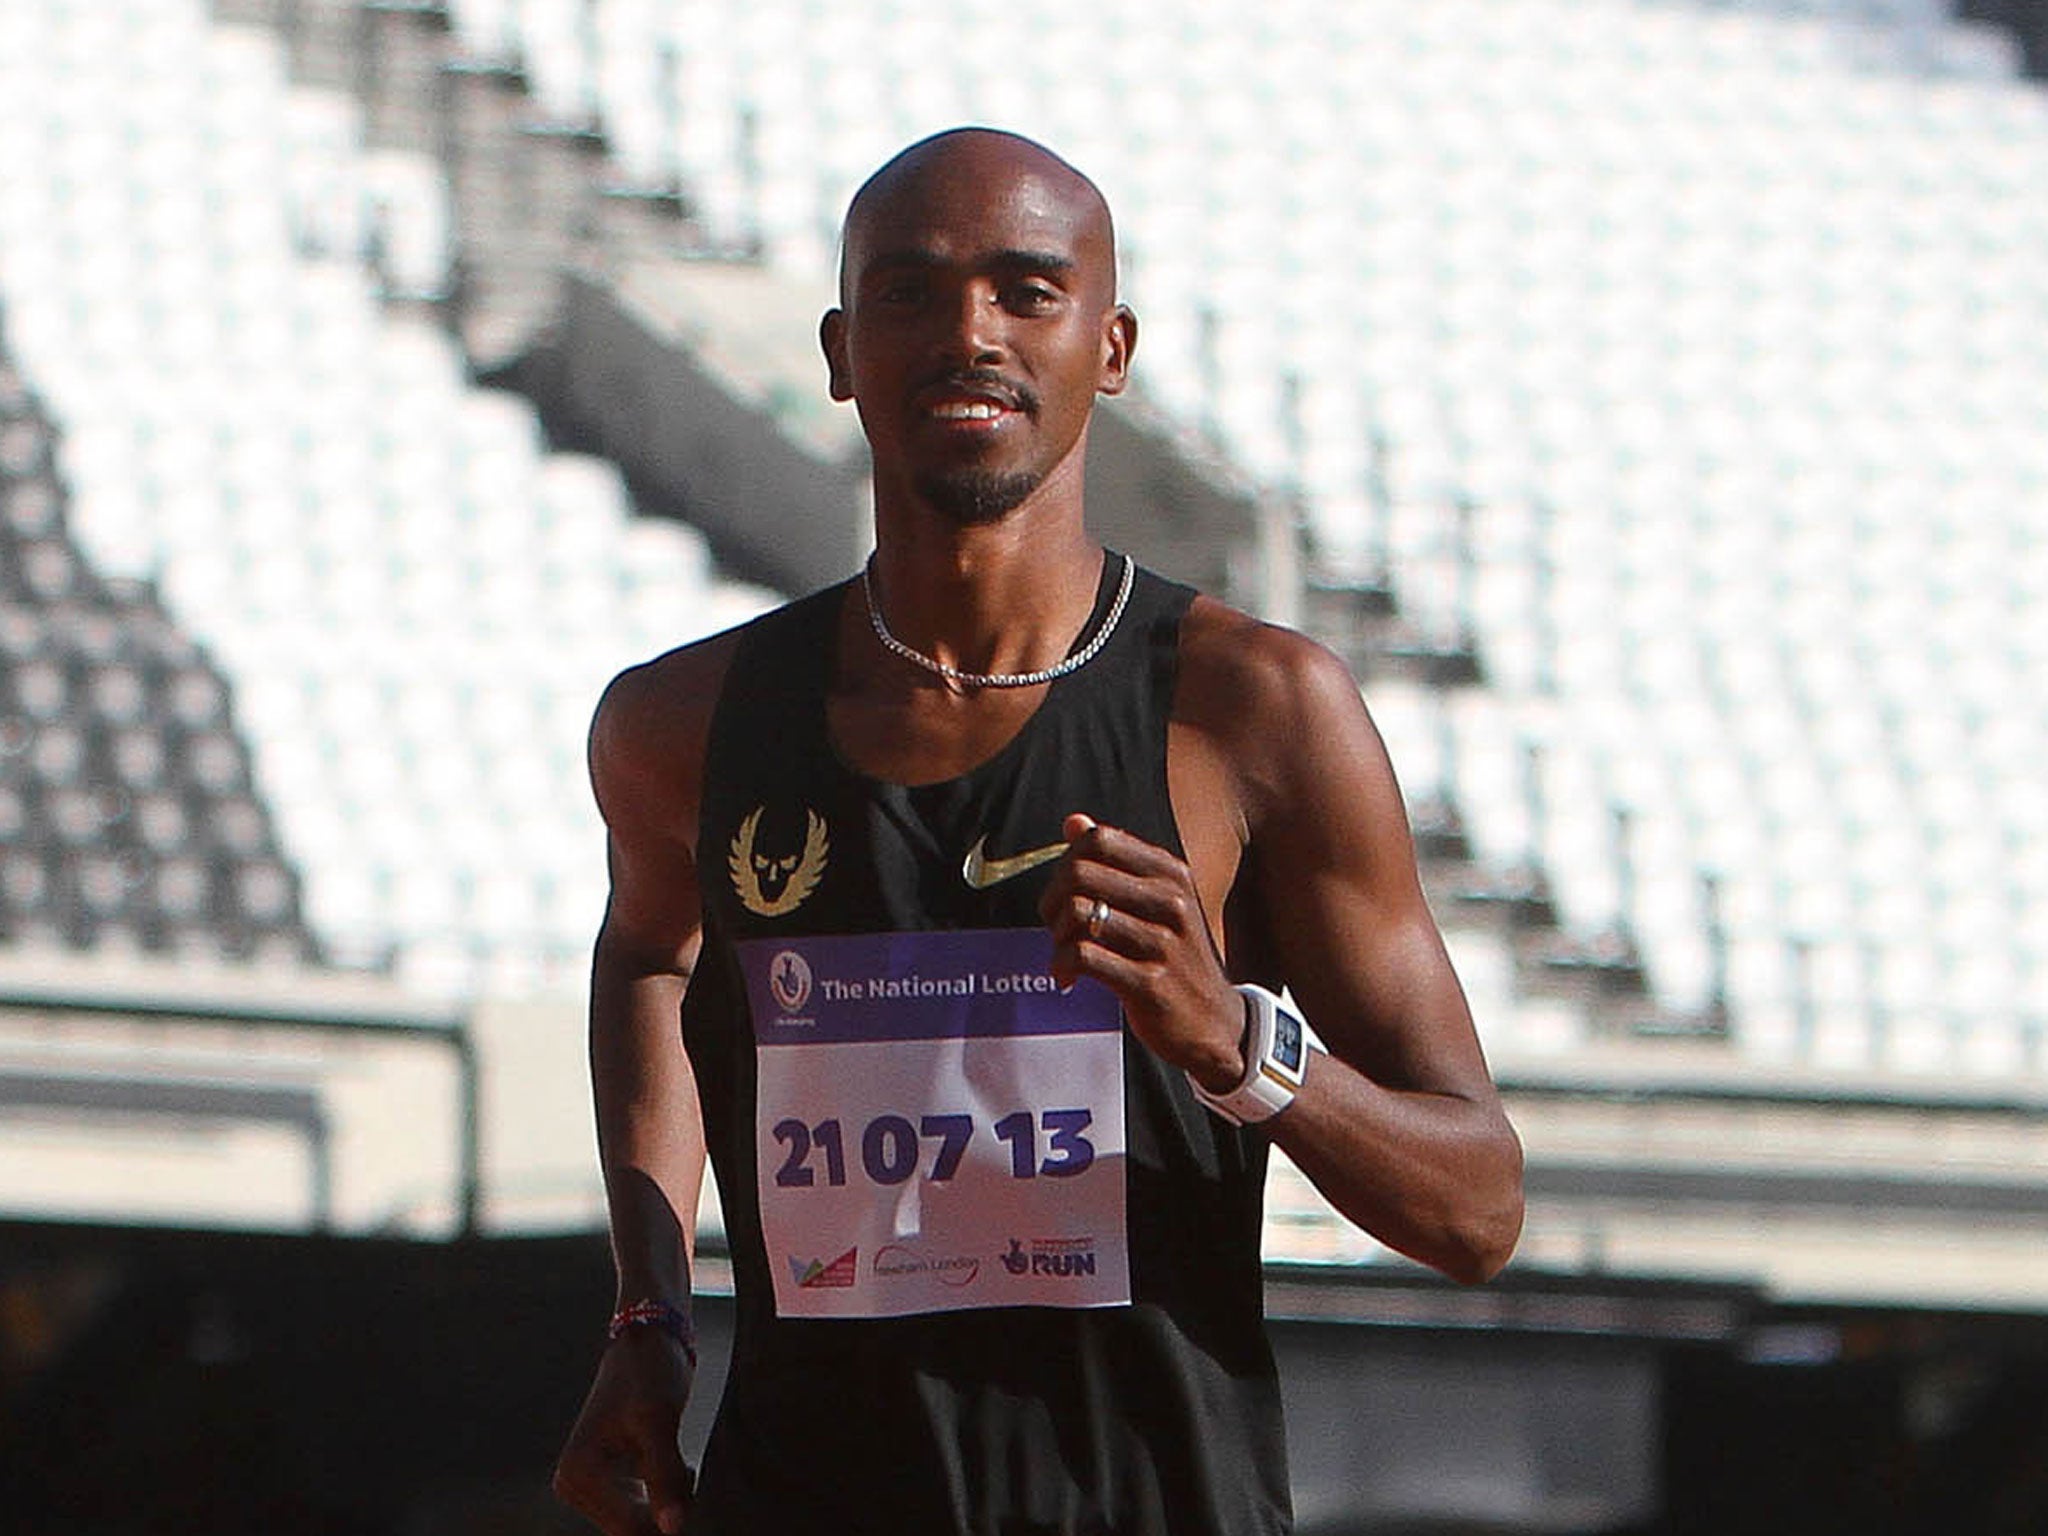 Mo Farah takes on his biggest challenge since his golden Olympics